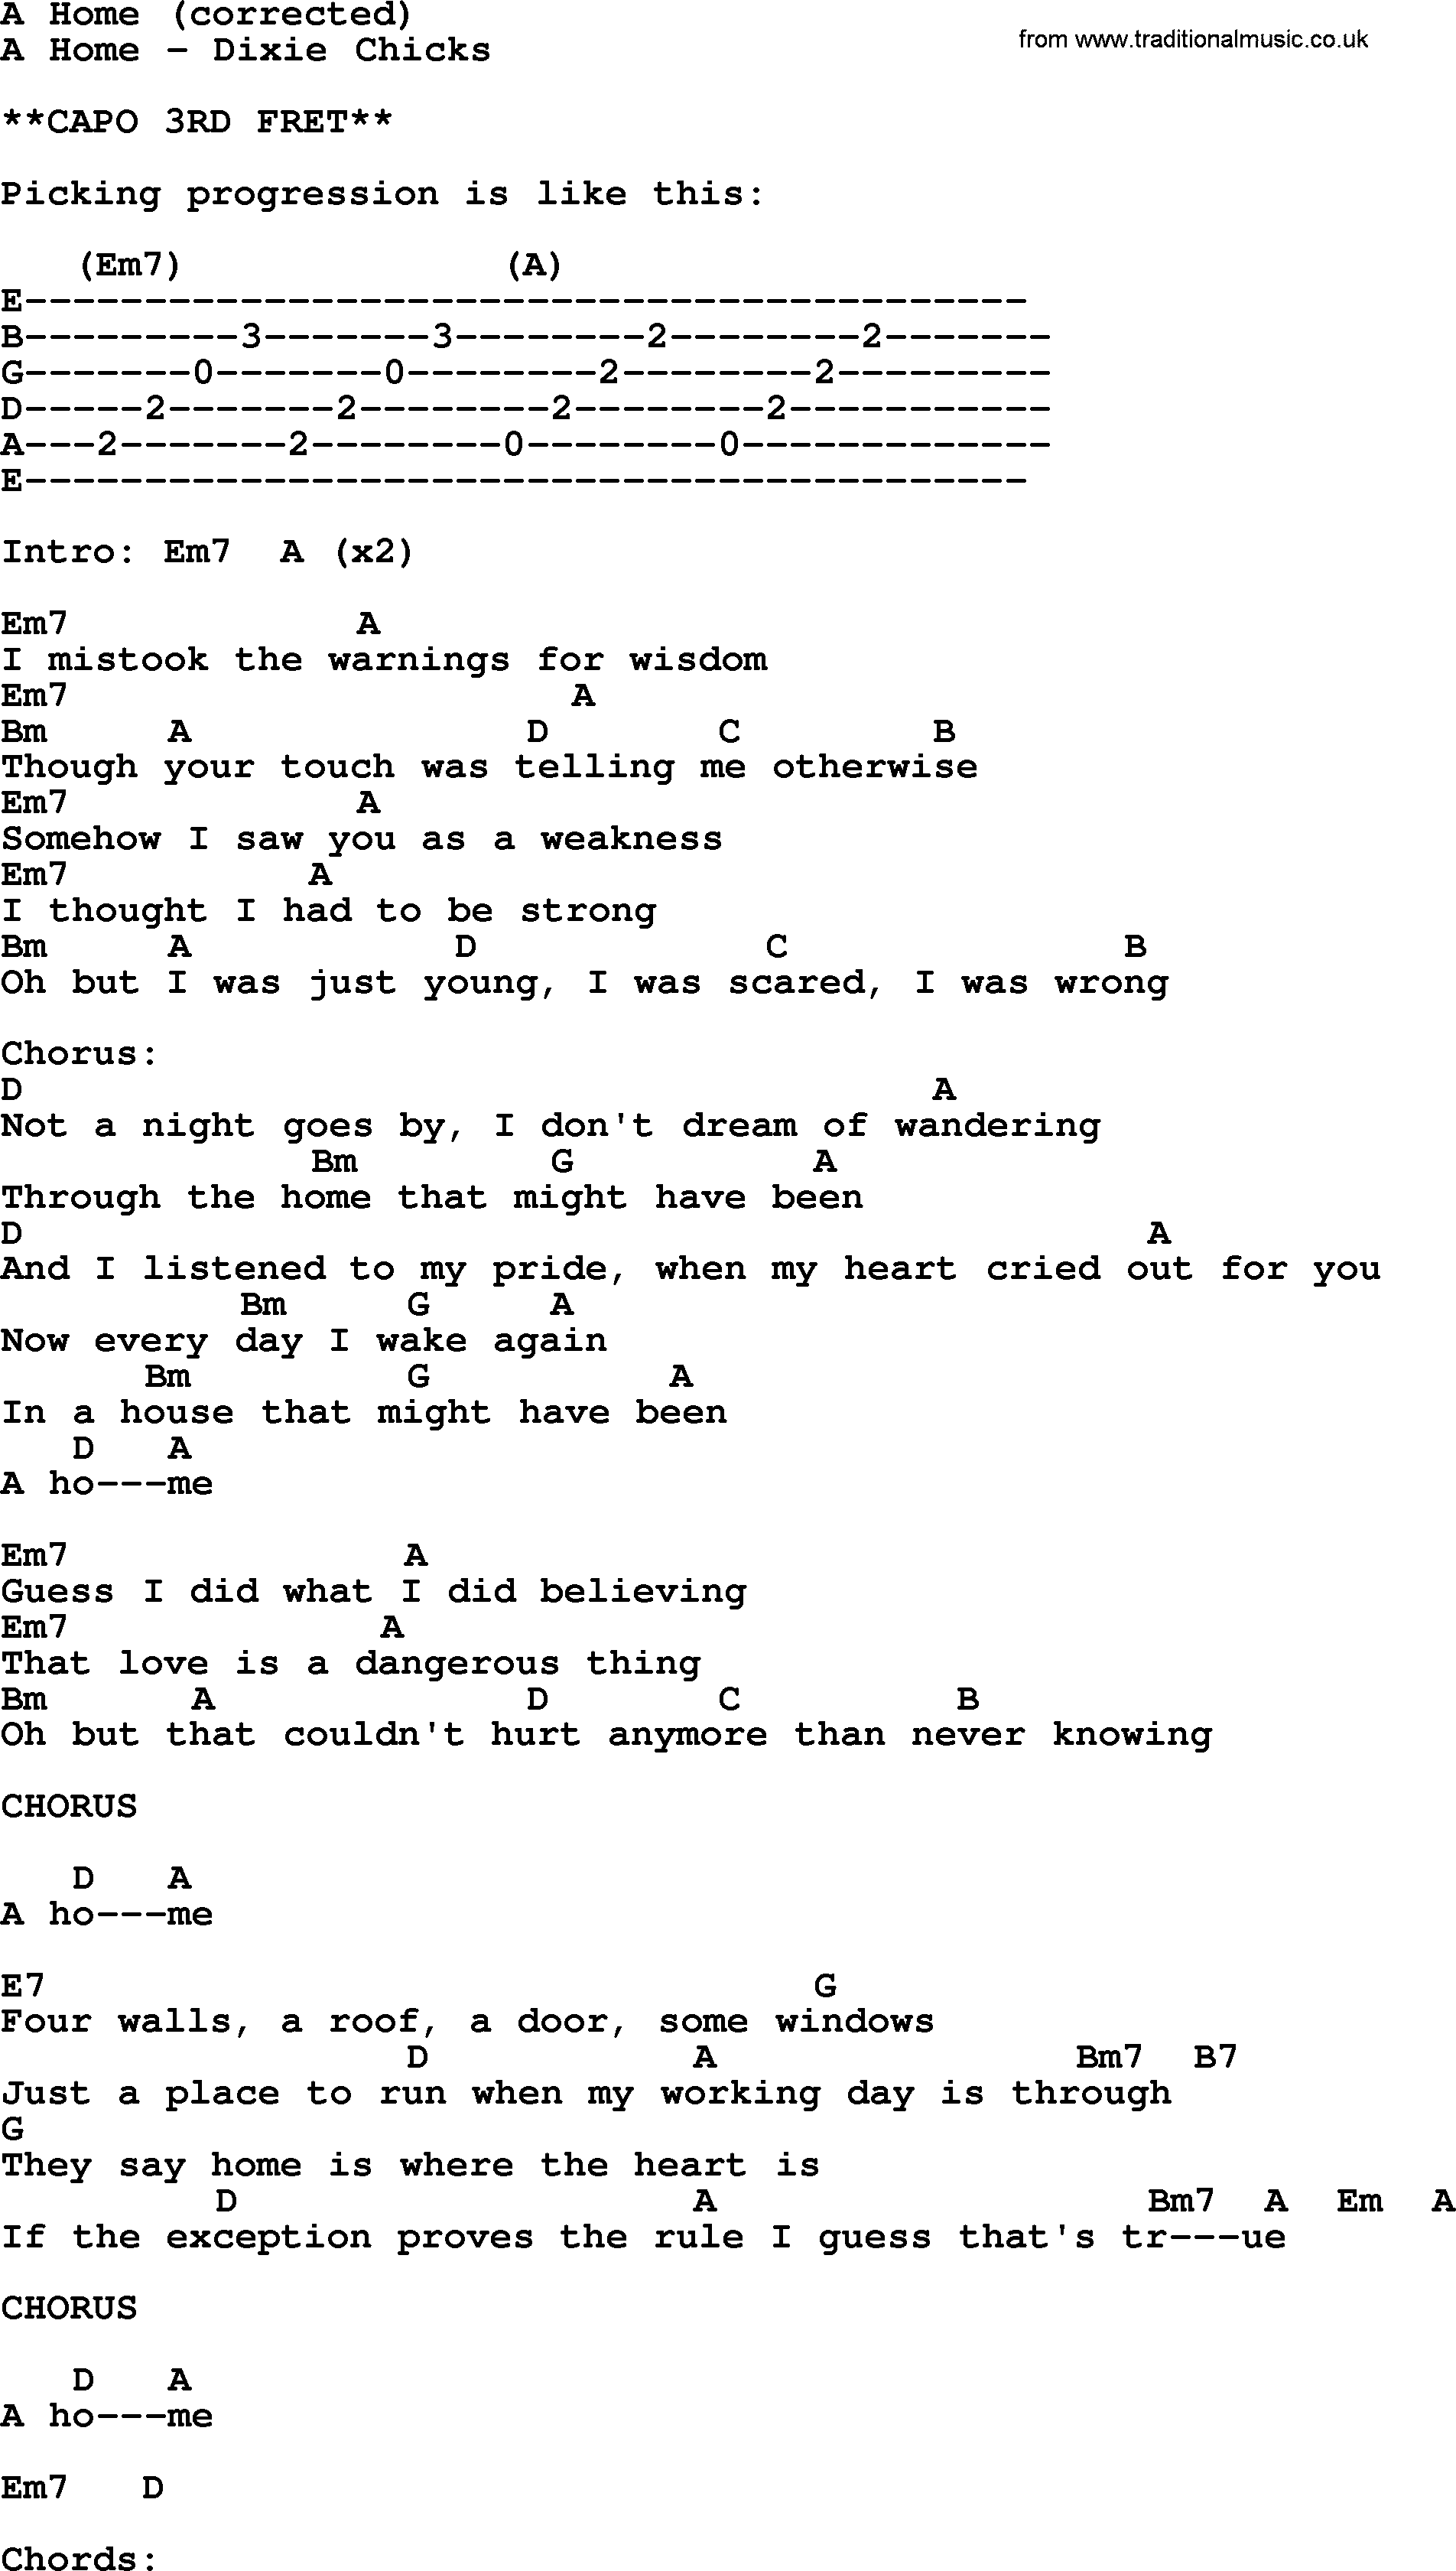 Bluegrass song: A Home (Corrected), lyrics and chords